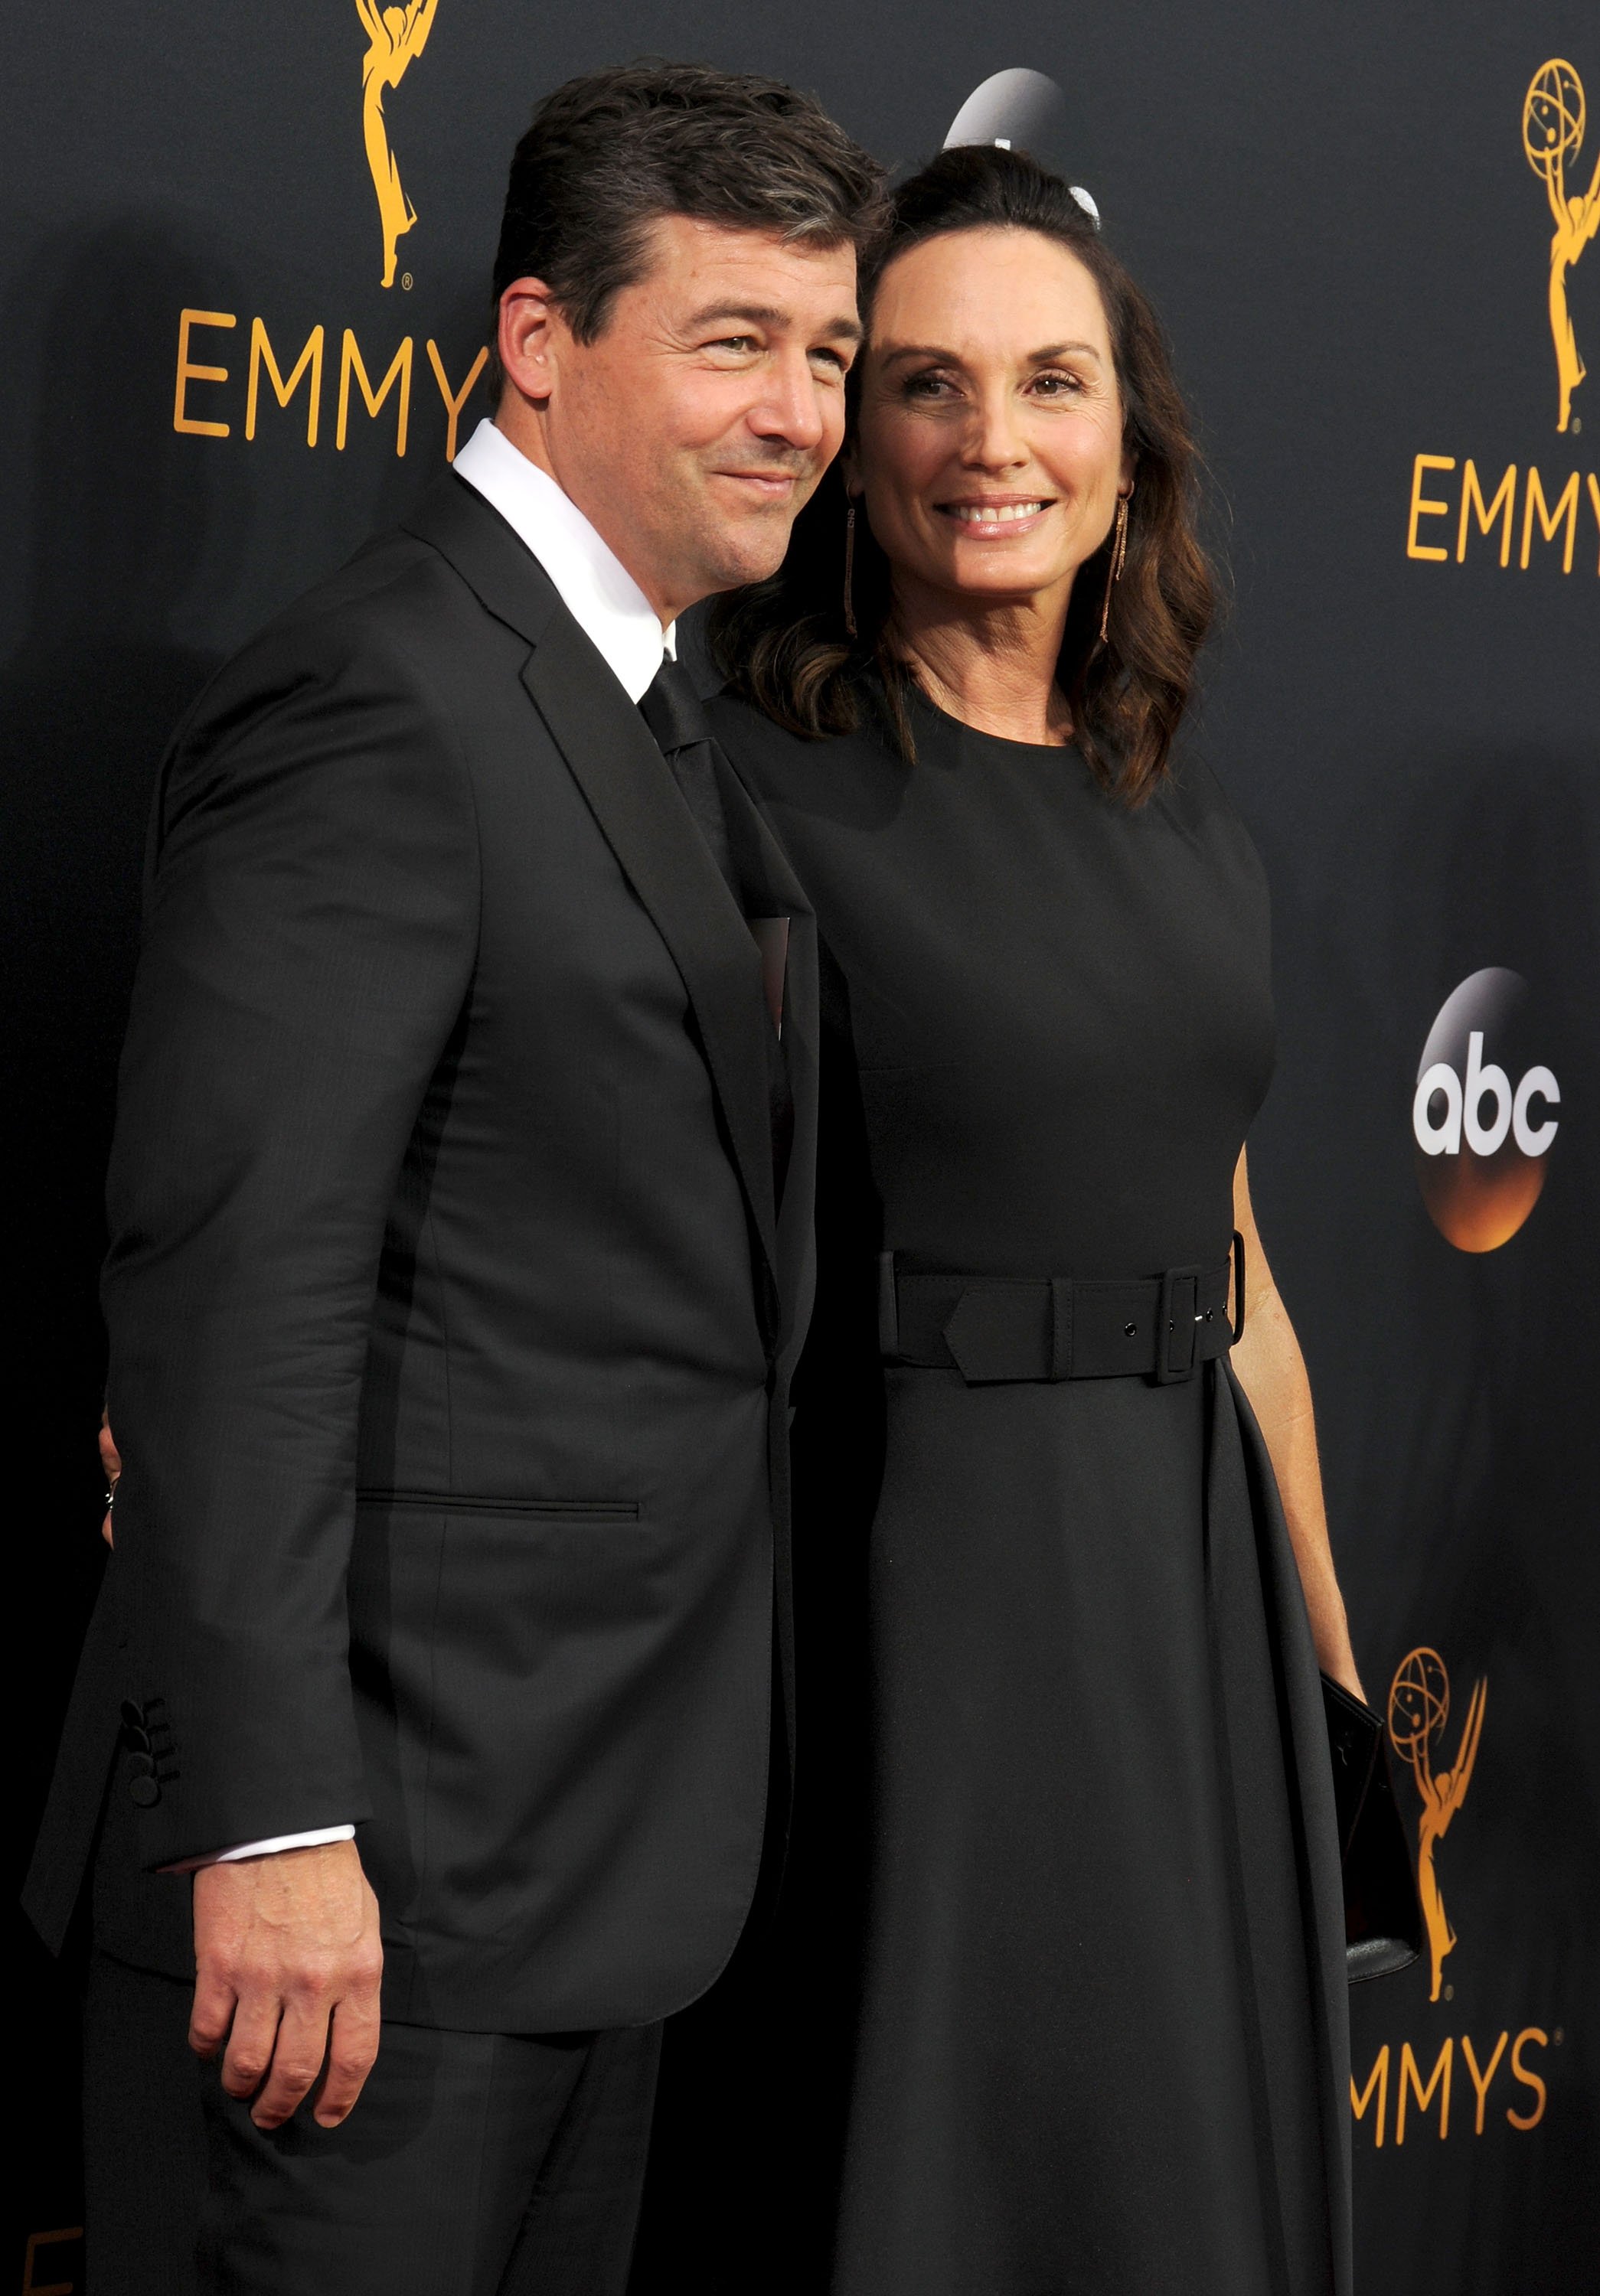 Kyle Chandler and Kathryn Chandler at the 68th Primetime Emmy Awards on September 18, 2016, in California. | Source: Getty Images